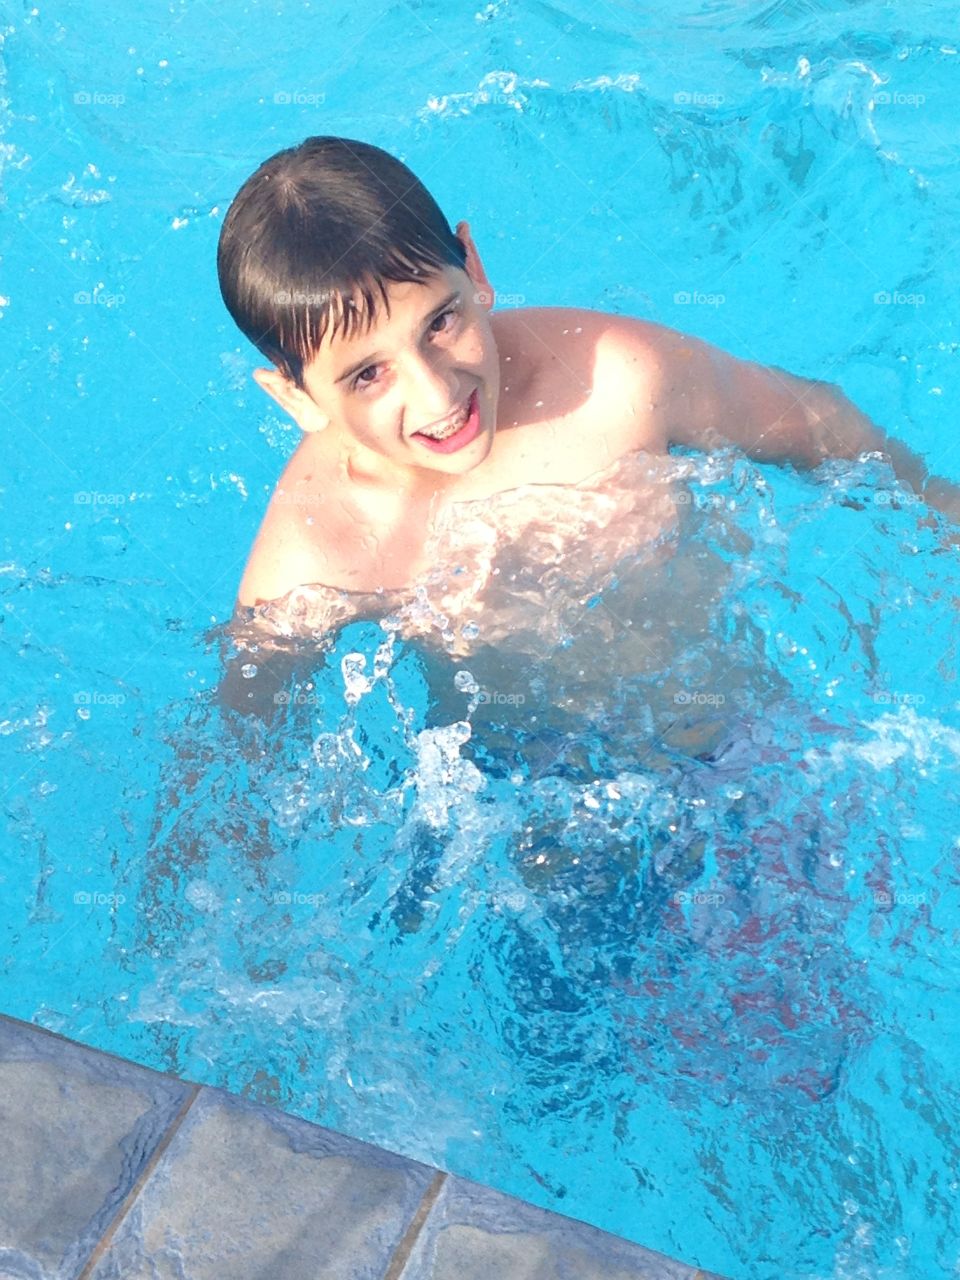 My son. My son is very special to me. He is swimming in this pic. We love Summer!